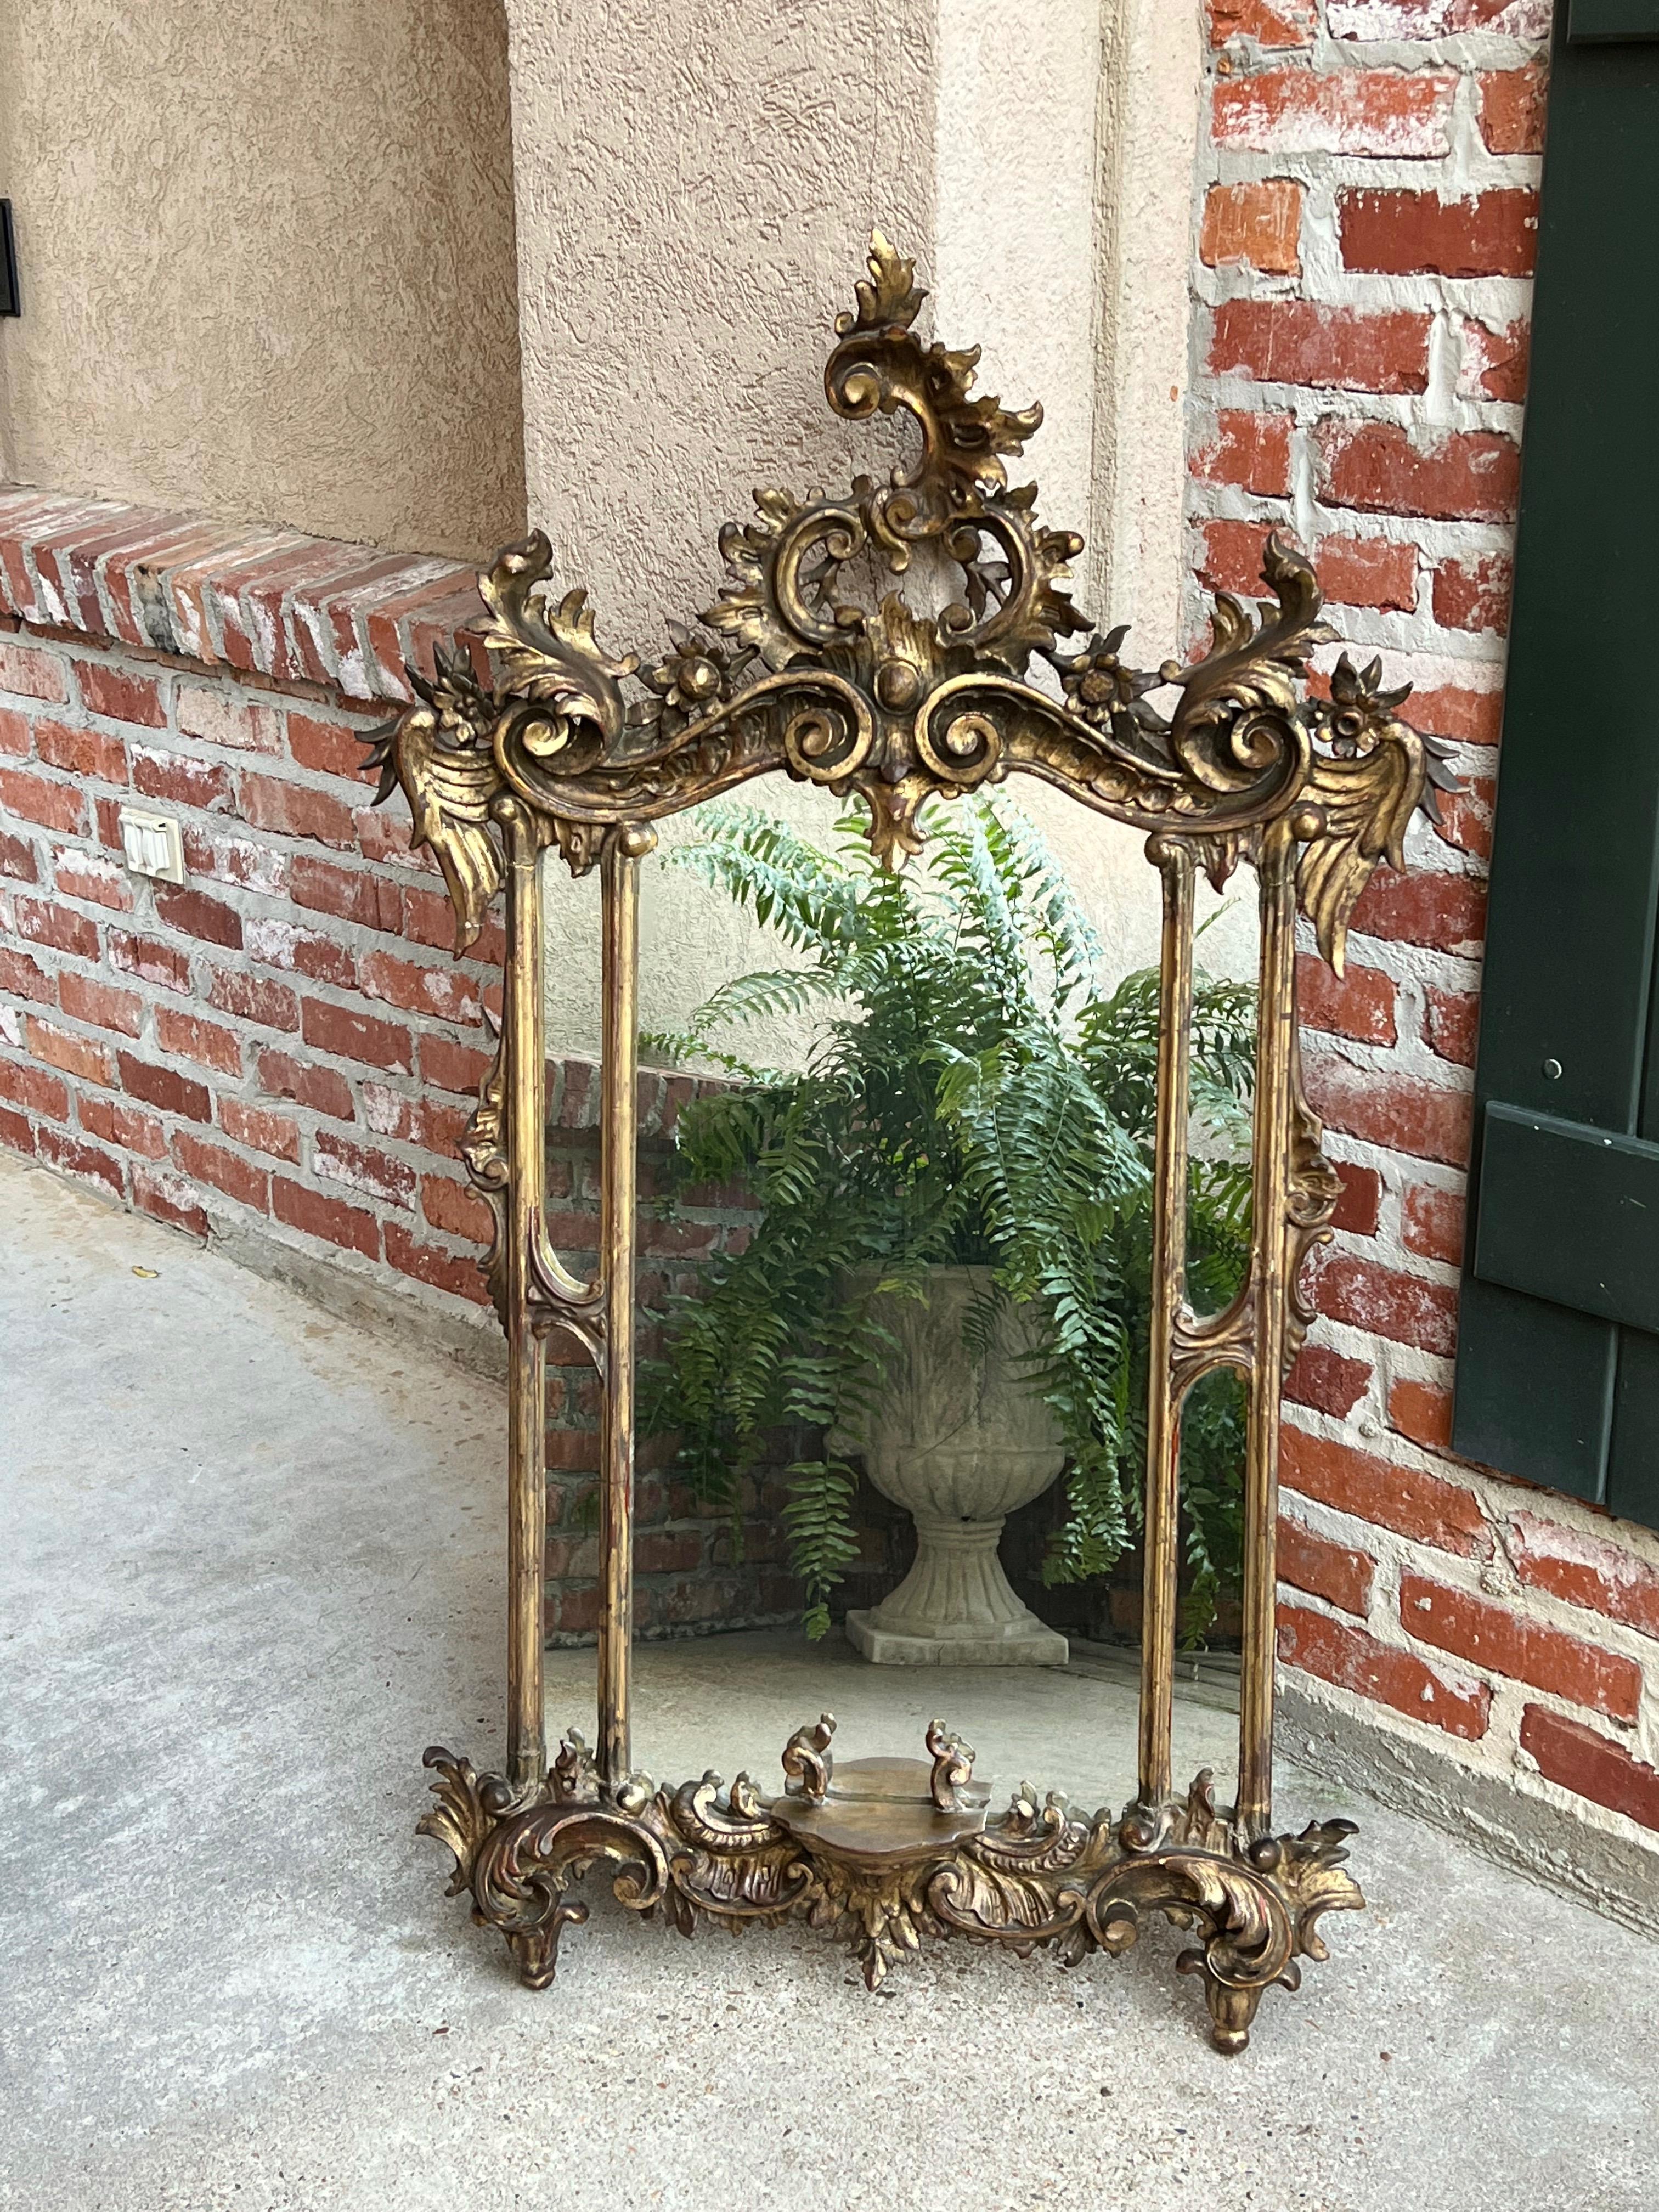 Antique French carved wood gold gilt frame wall mantel mirror Rococo Louis XV

Direct from France, a very ornate antique gold gilt mirror, large in size with spectacular details!
Fabulous large crown, asymmetrical rococo styling, with highly